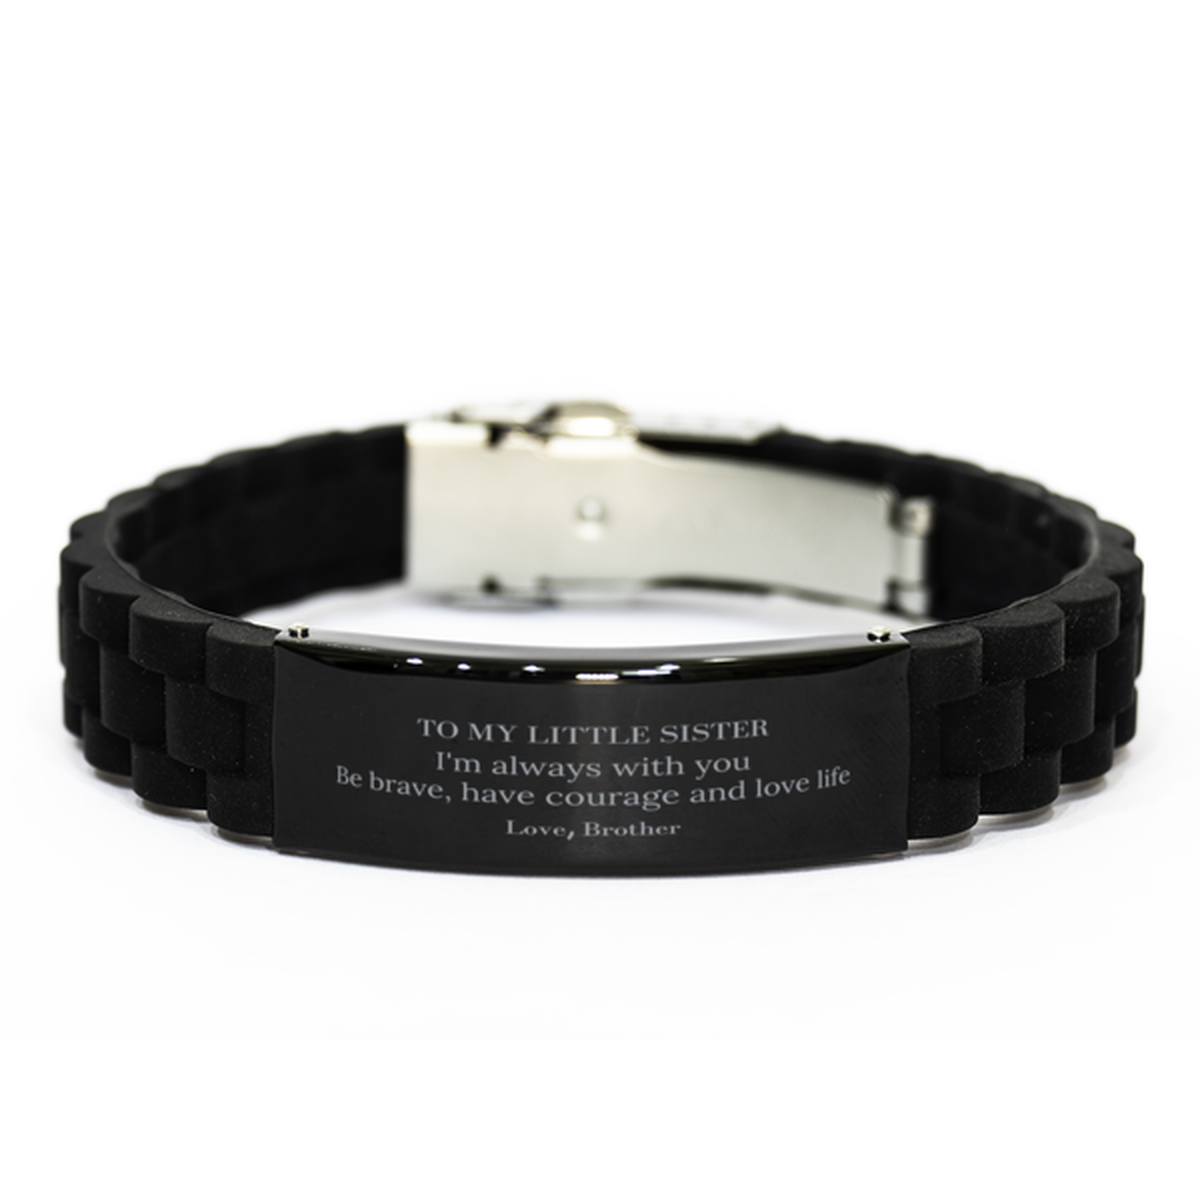 To My Little Sister Gifts from Brother, Unique Black Glidelock Clasp Bracelet Inspirational Christmas Birthday Graduation Gifts for Little Sister I'm always with you. Be brave, have courage and love life. Love, Brother